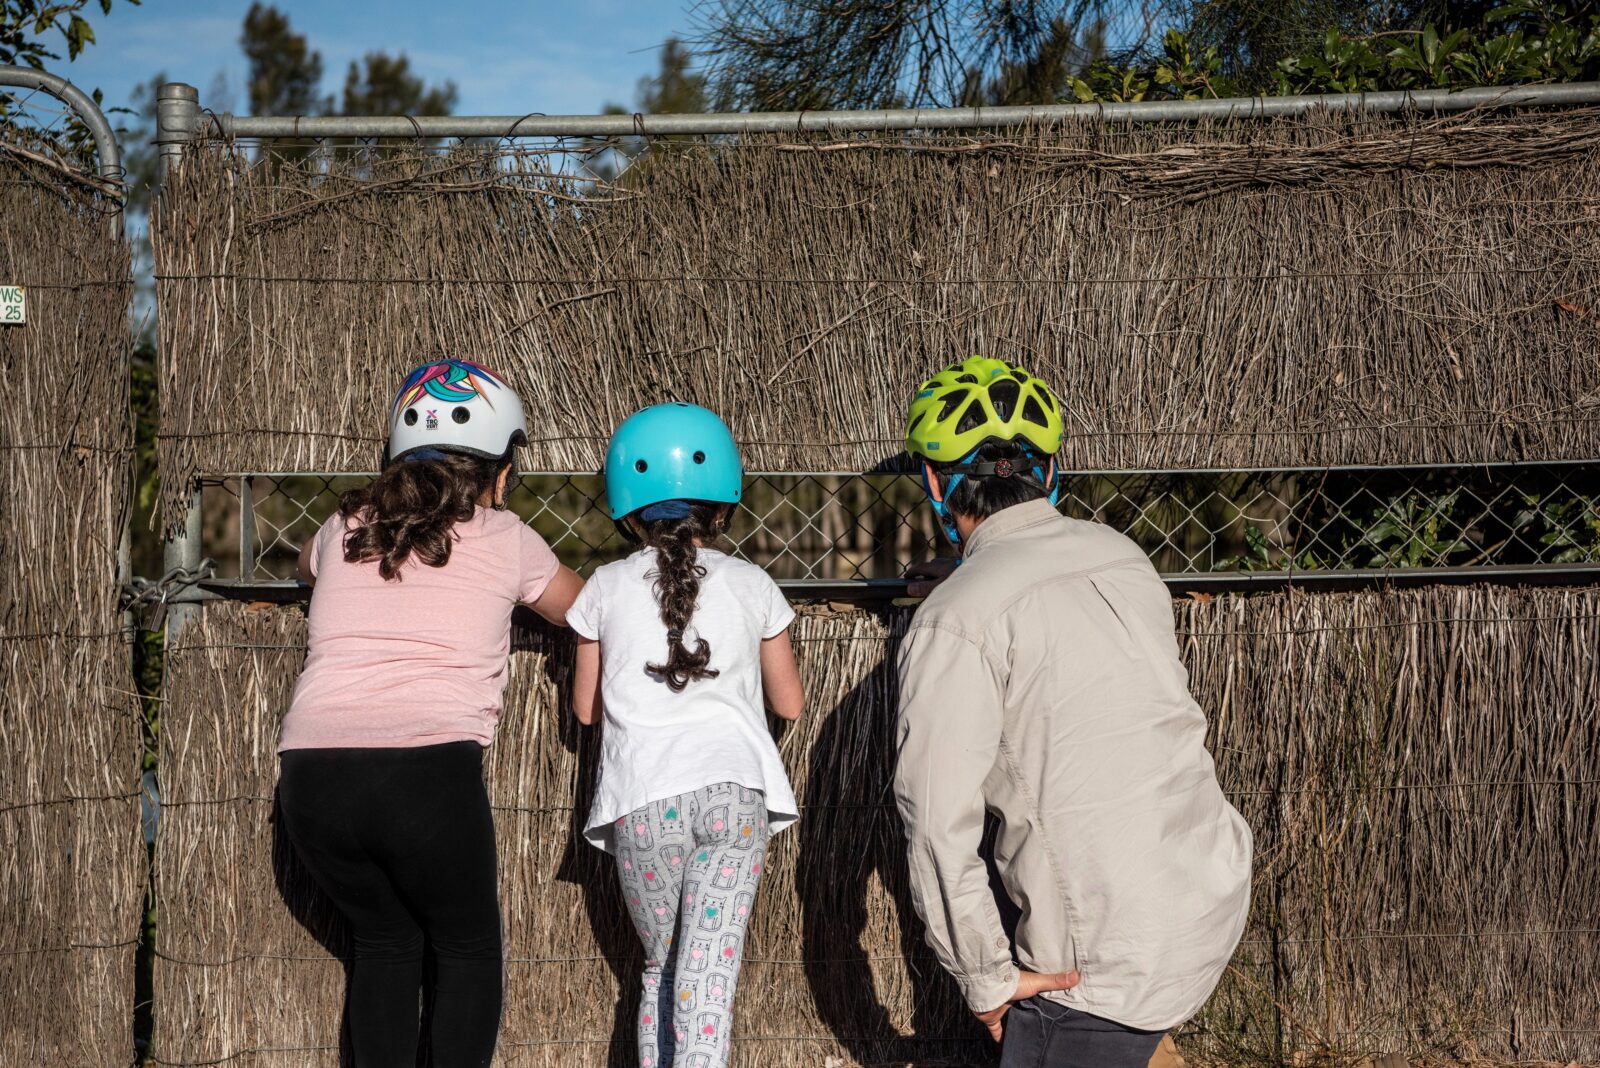 An adult and two children looking away from the camera peeking through a fence to look at the pond